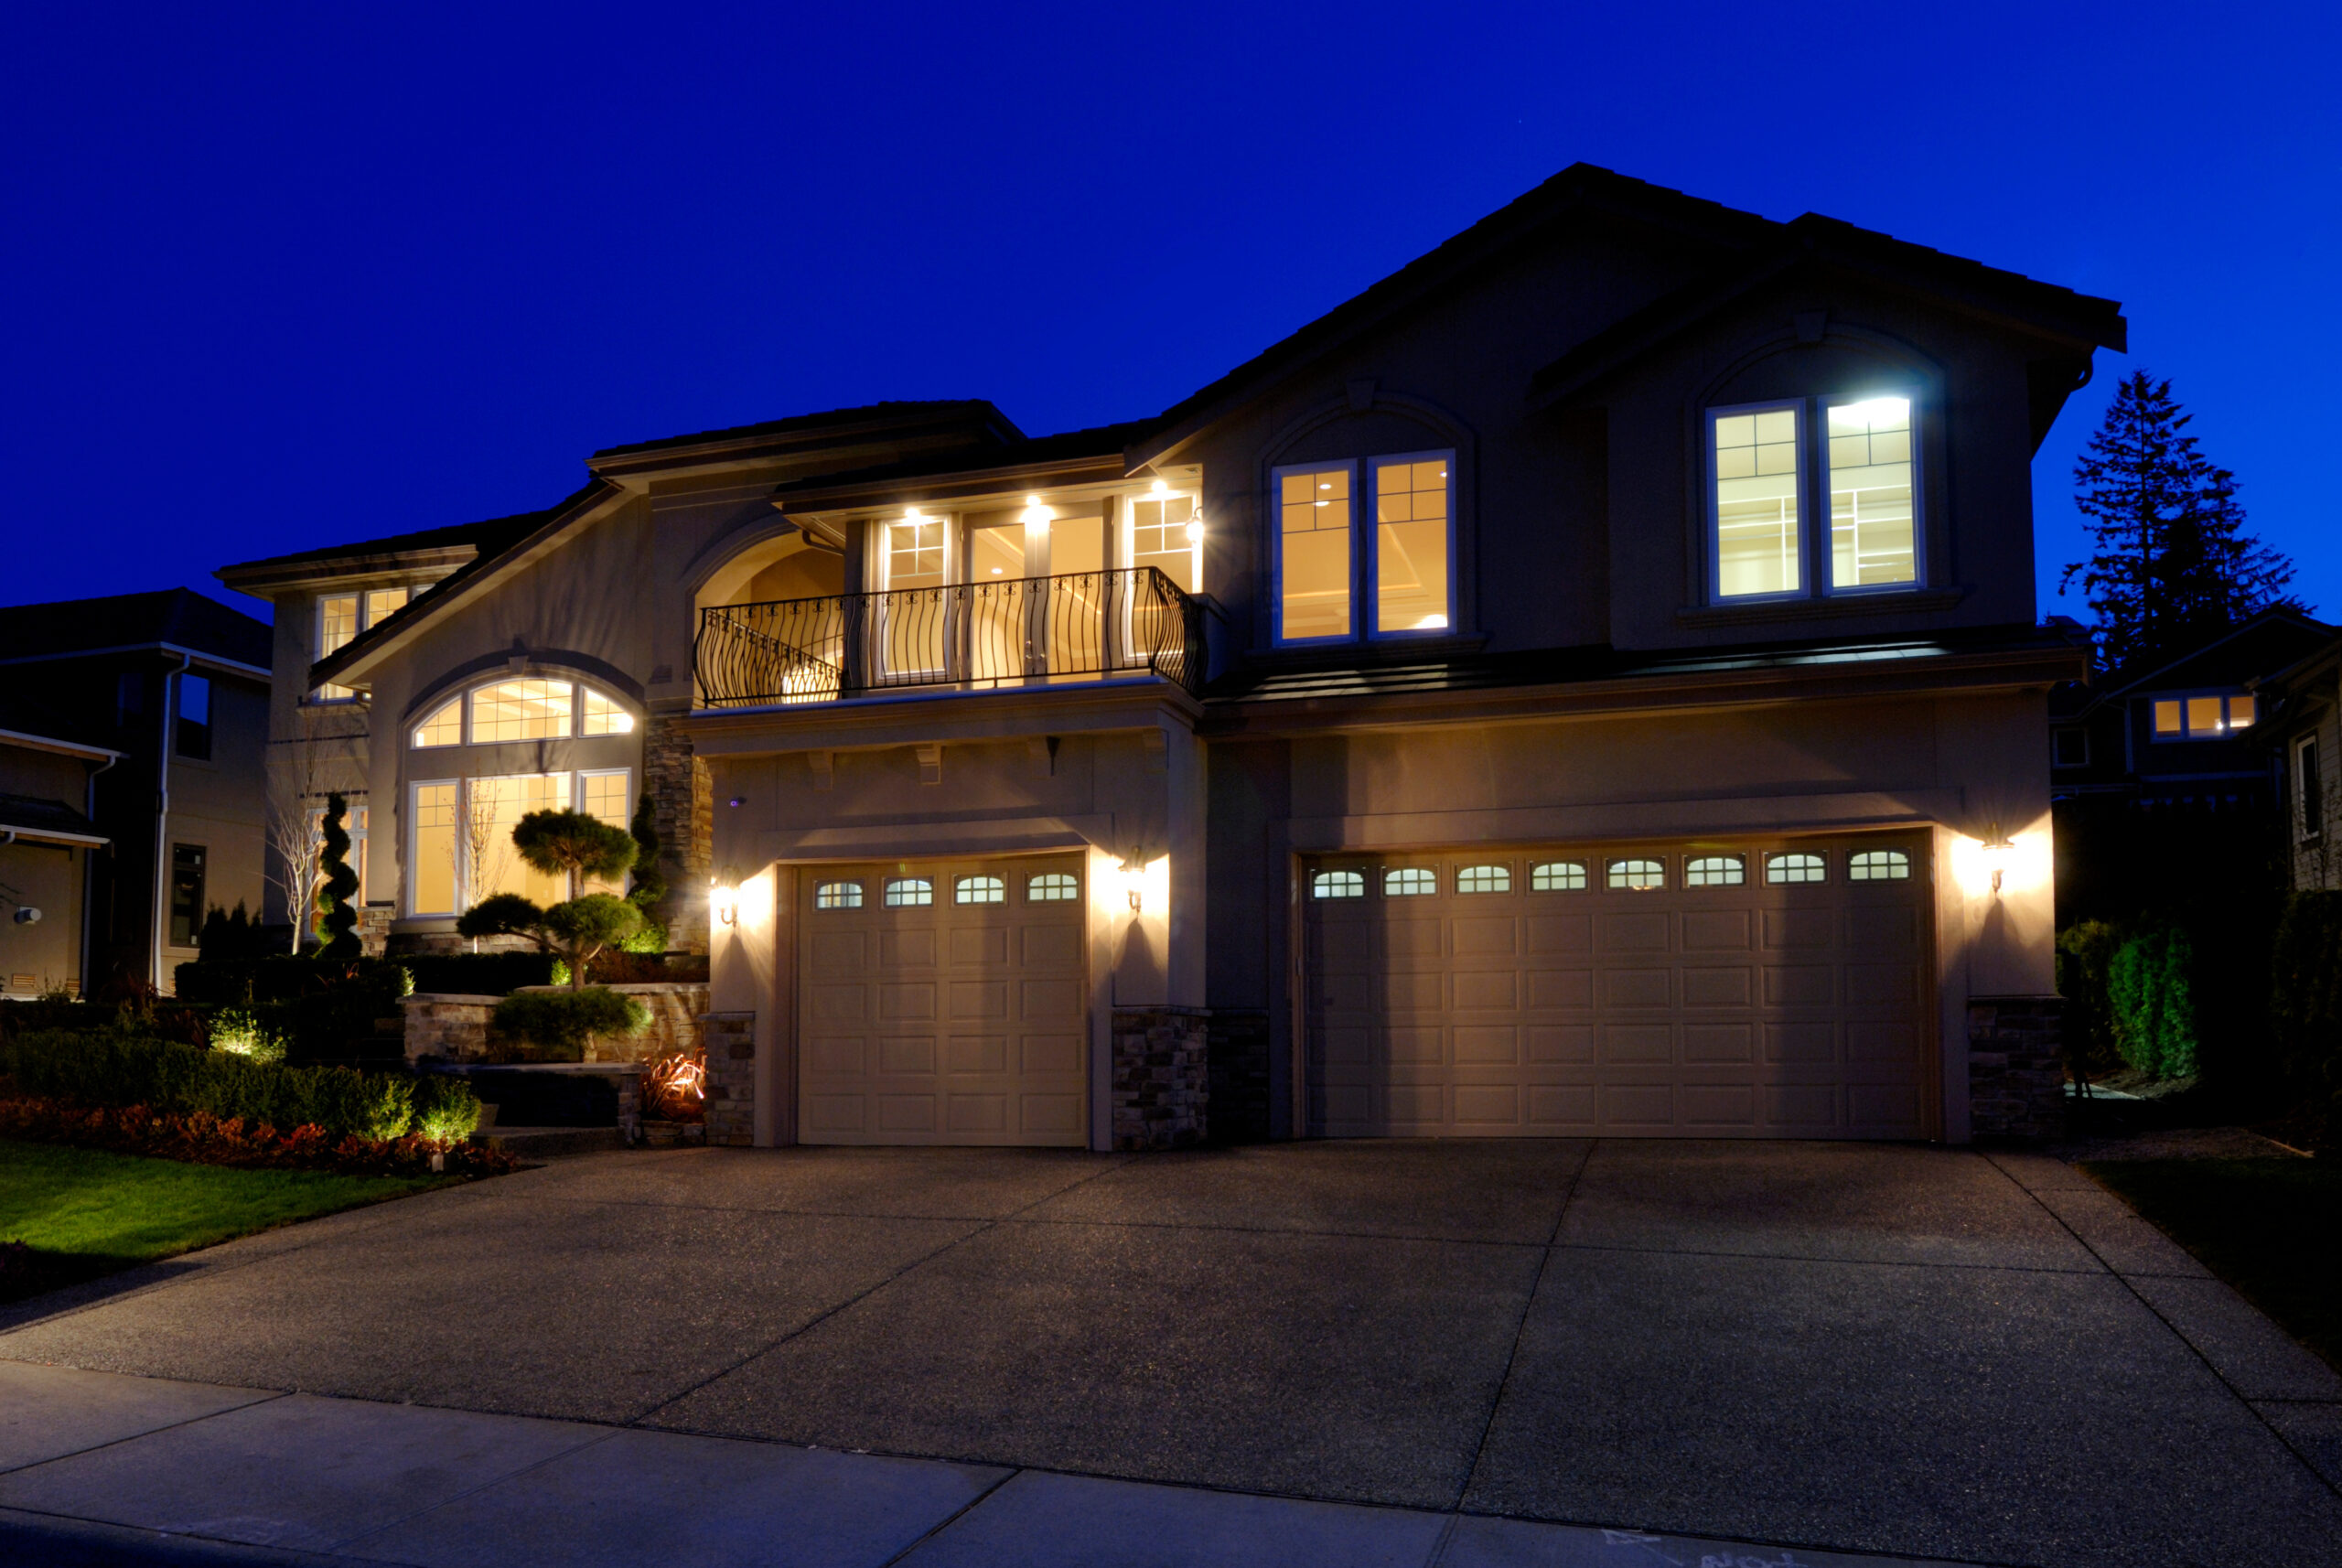 Well lit suburban home at night powered by solar panel system